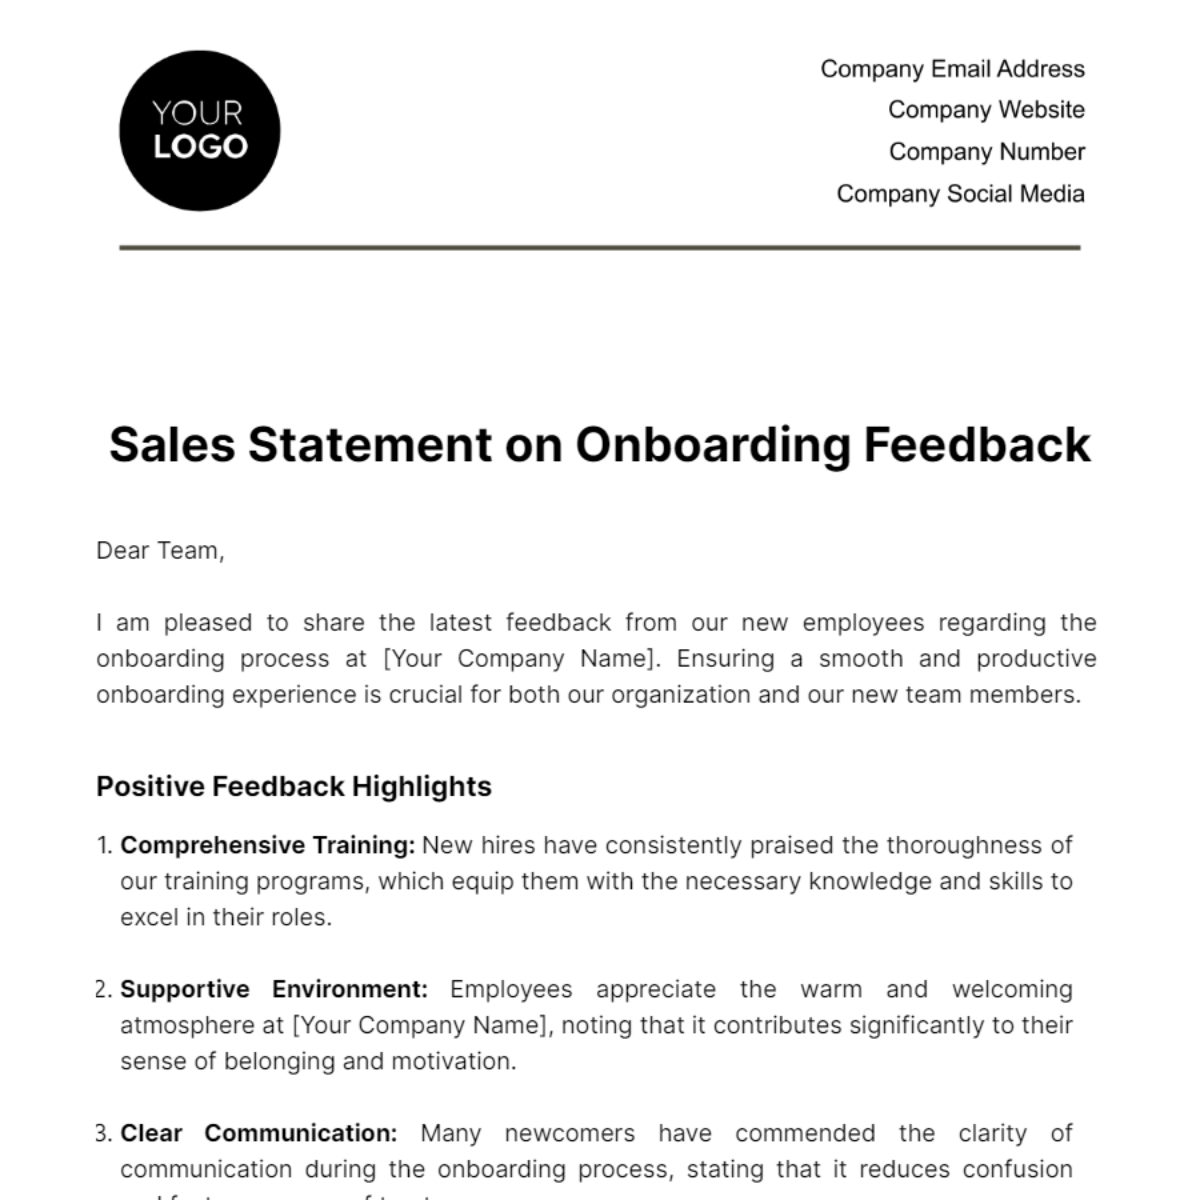 Free Sales Statement on Onboarding Feedback Template